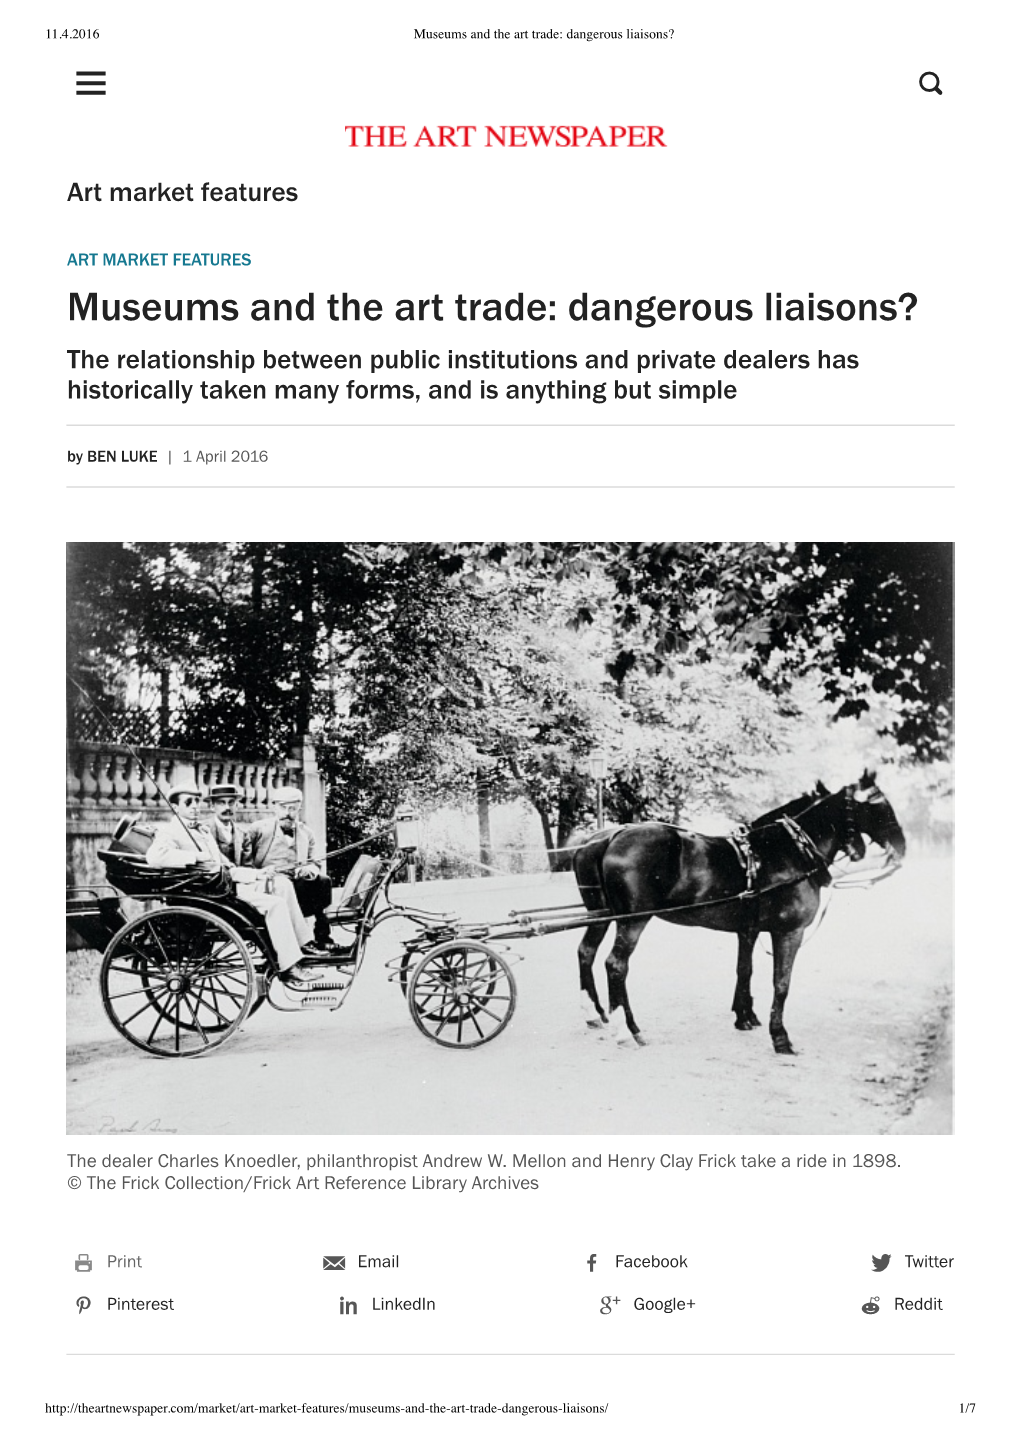 Museums and the Art Trade: Dangerous Liaisons?